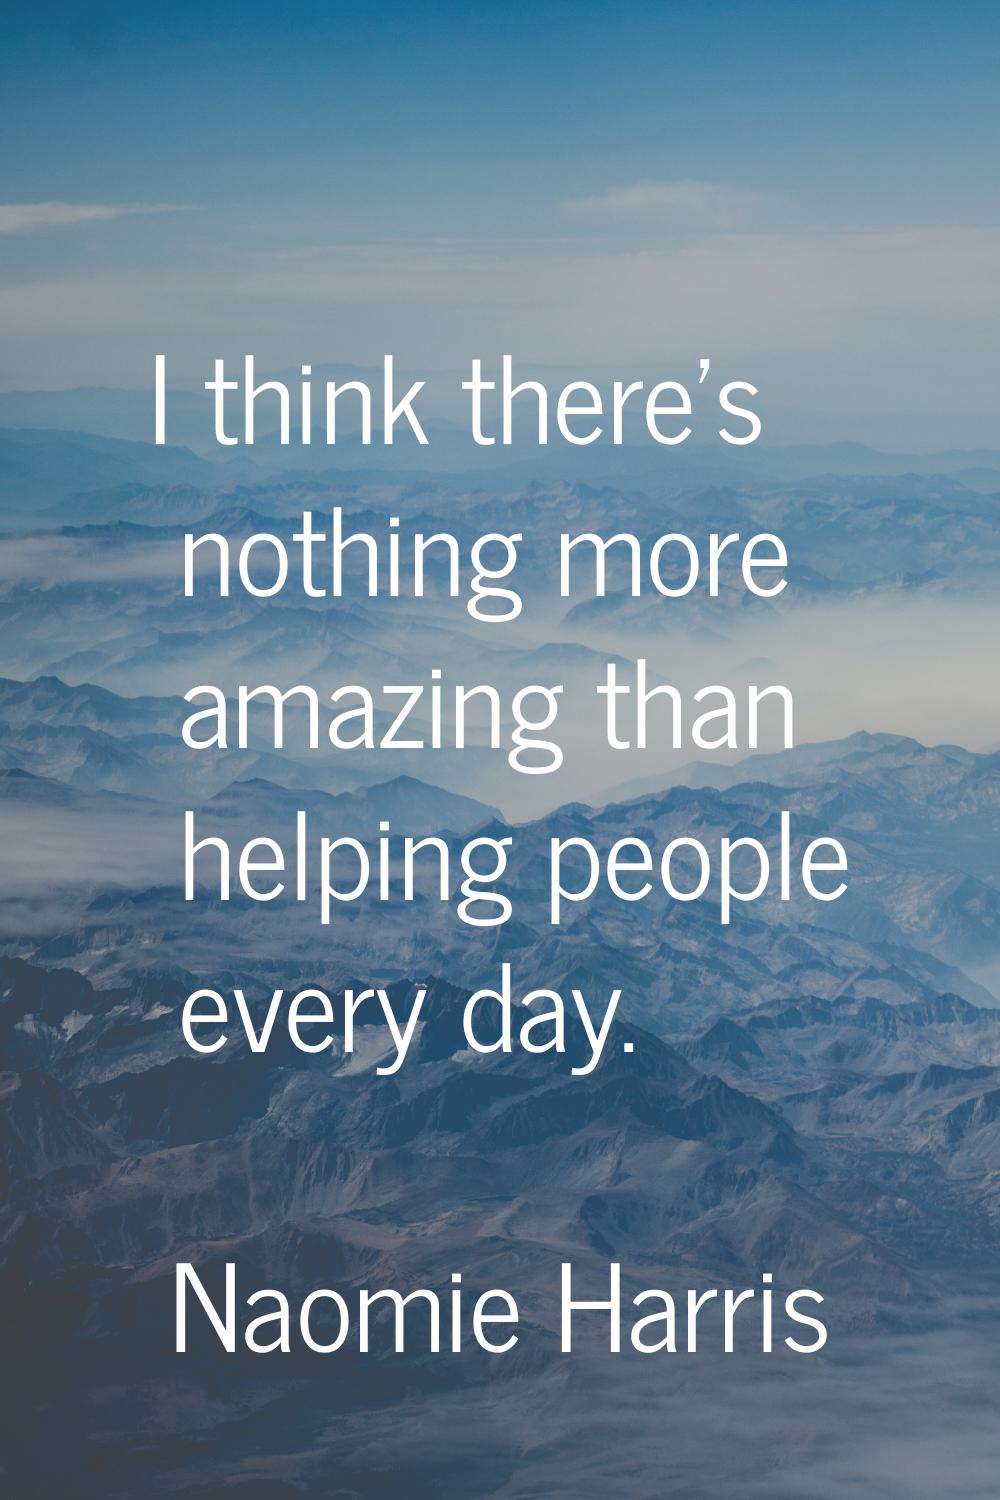 I think there's nothing more amazing than helping people every day.